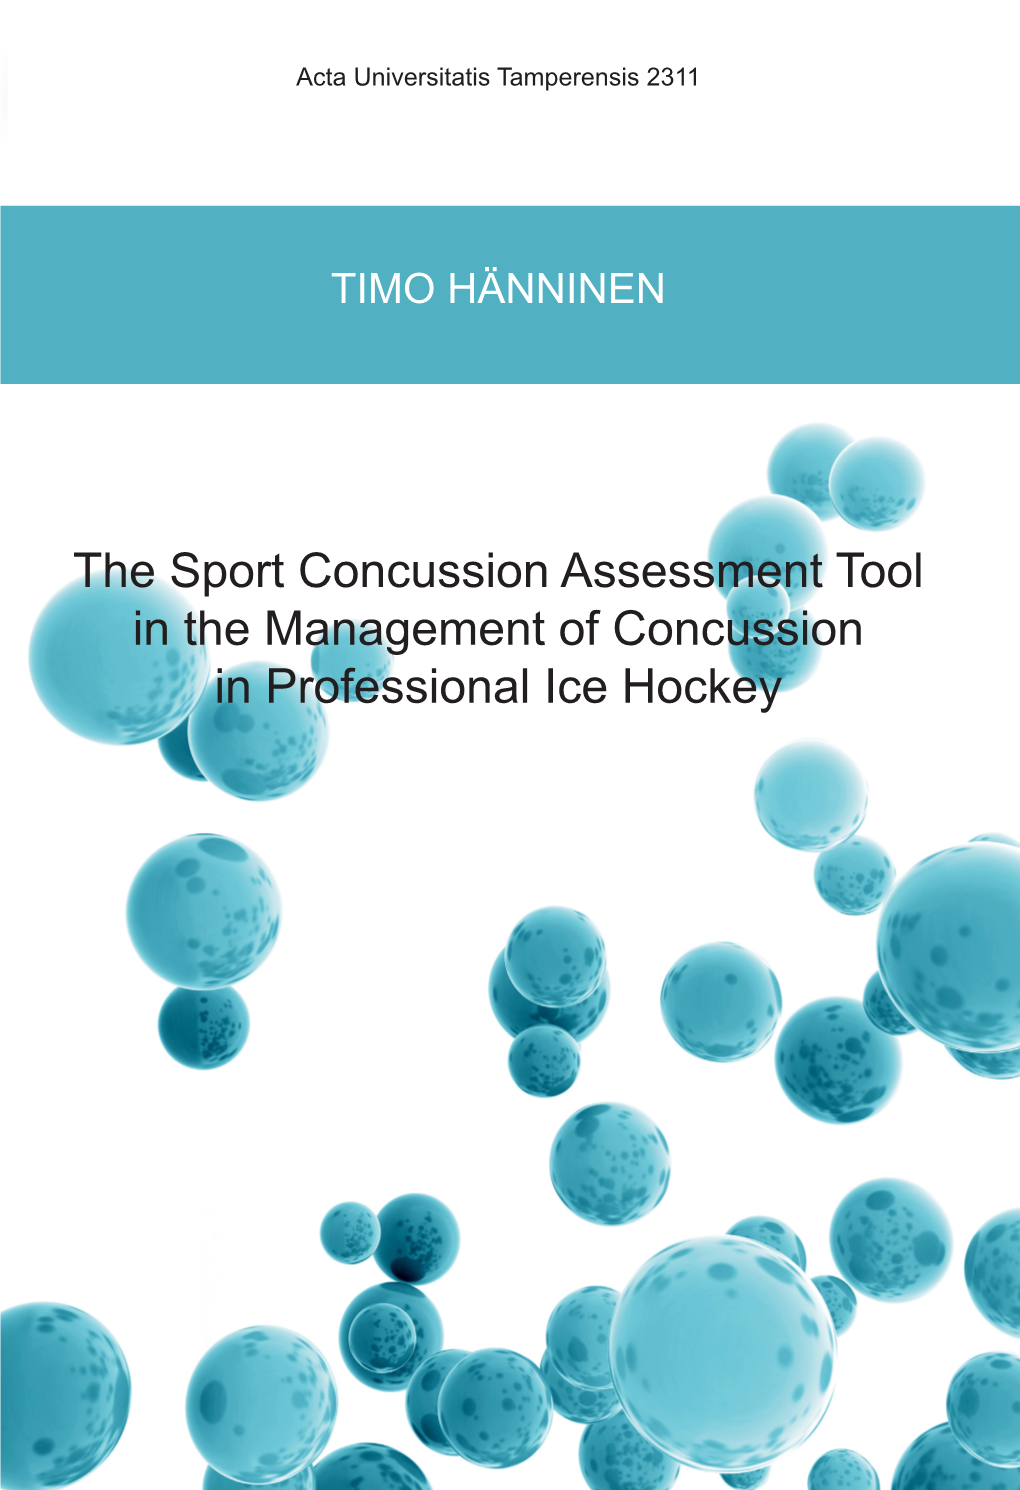 The Sport Concussion Assessment Tool in the Management of Concussion Professional Ice